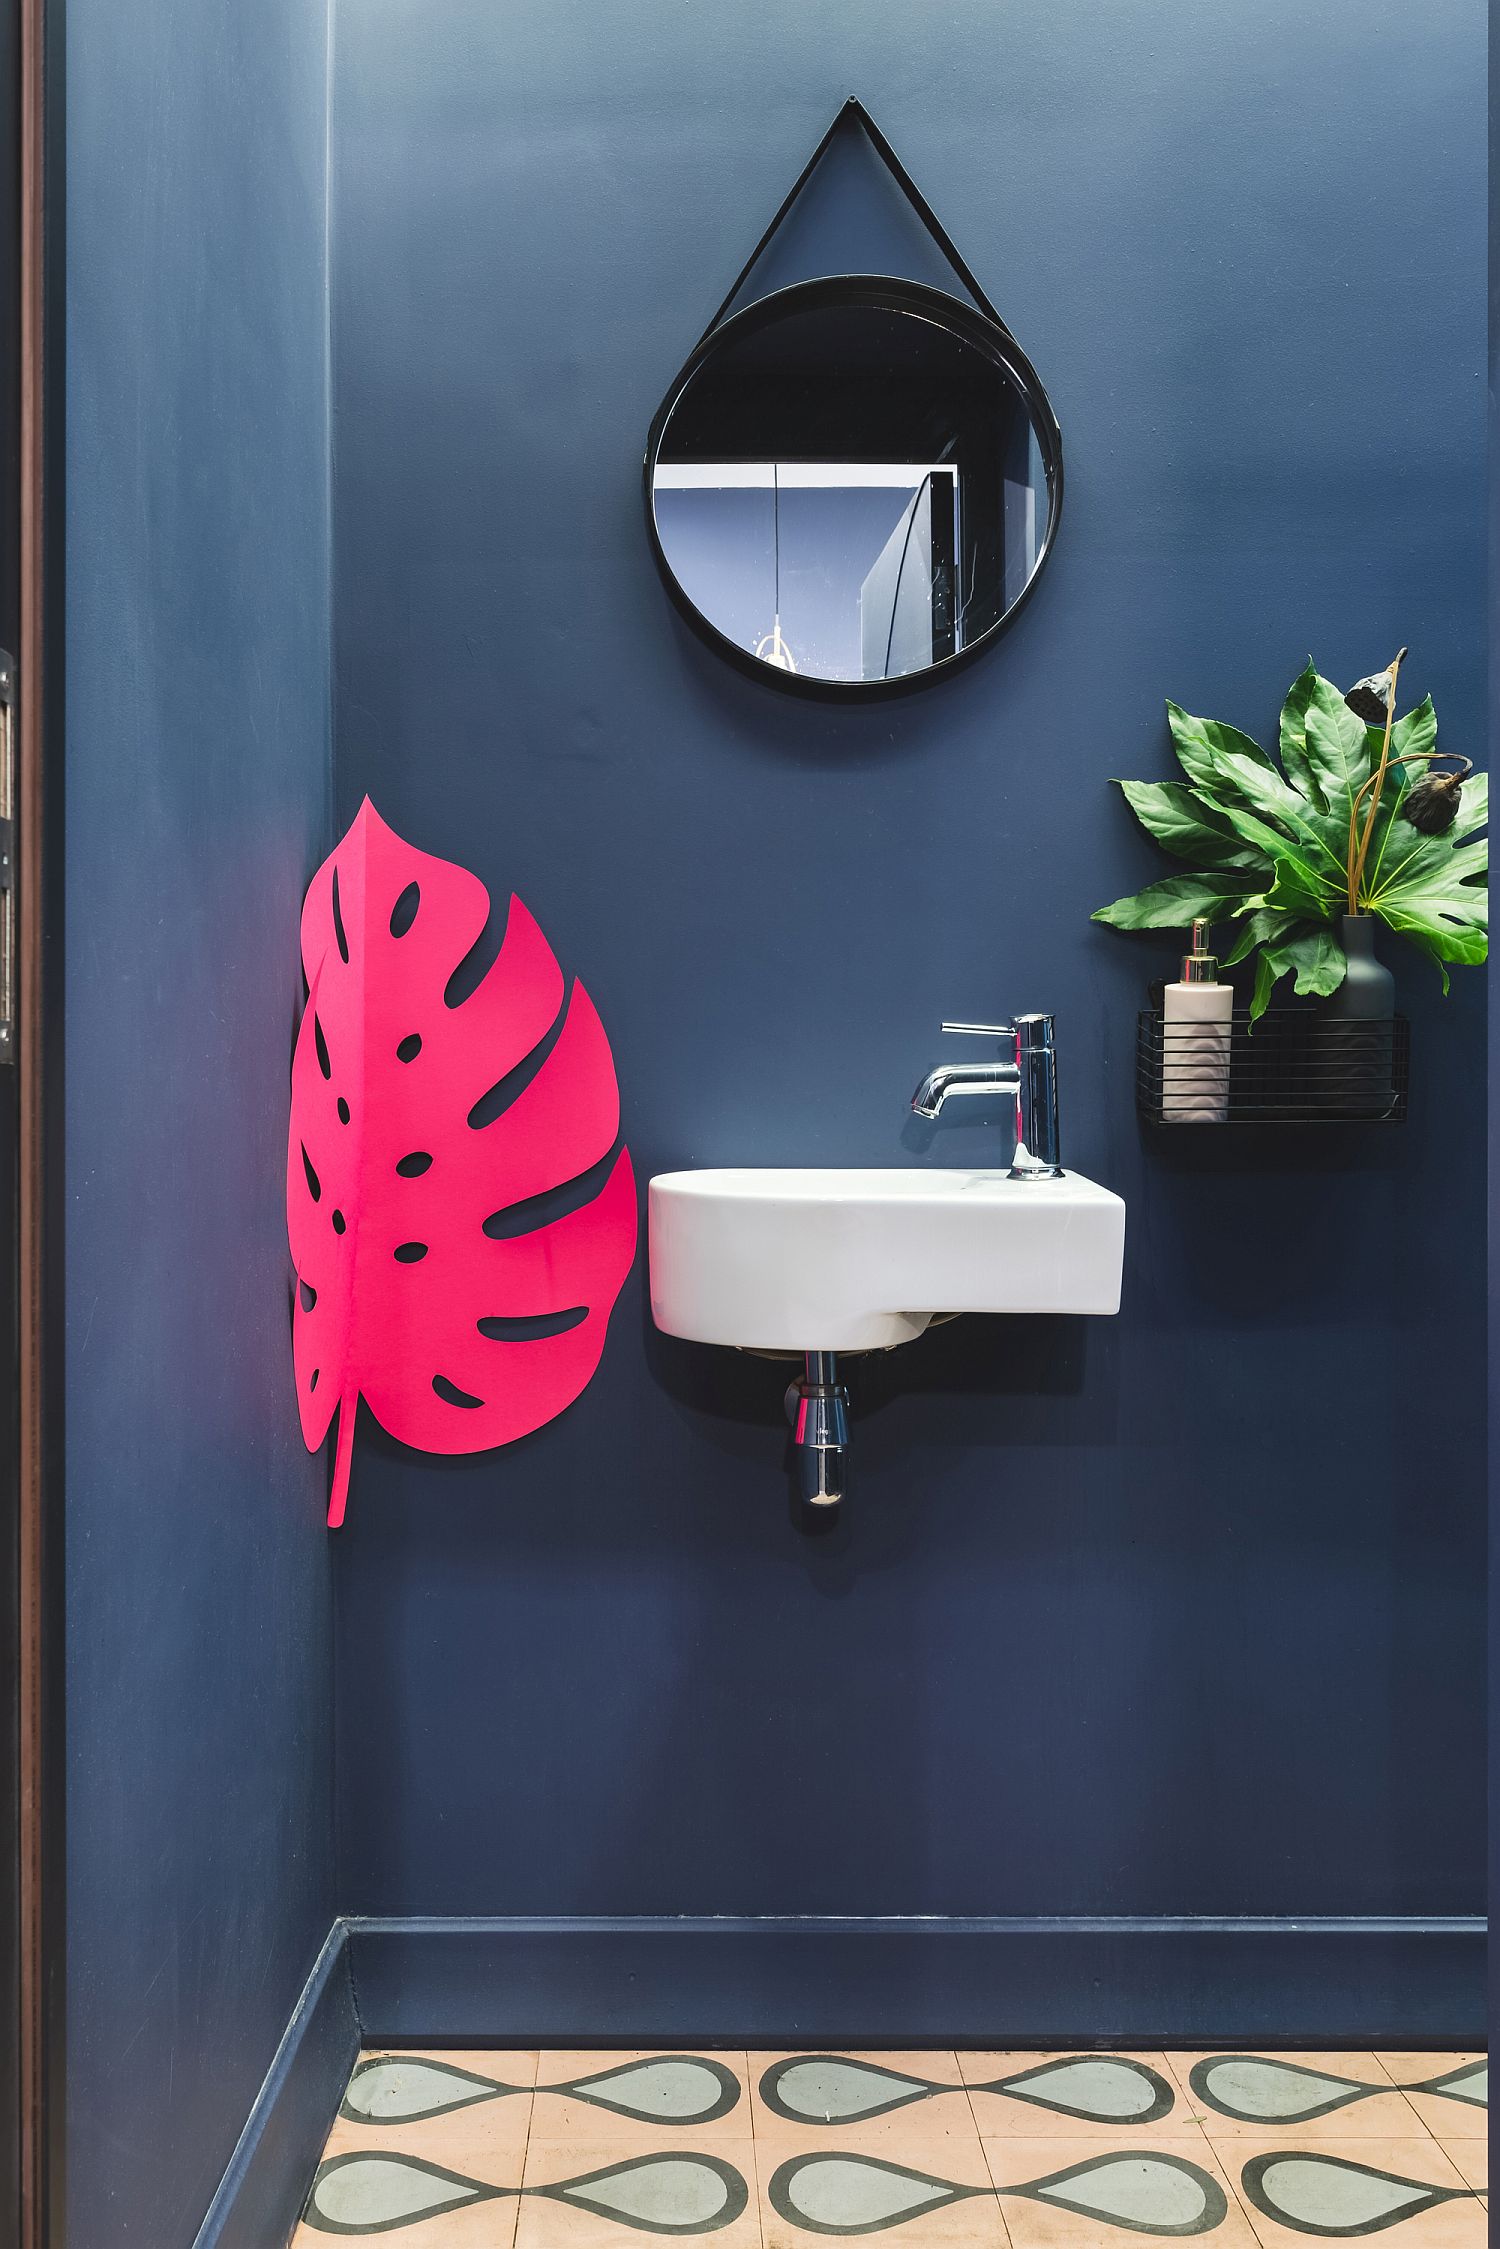 Bathrooms inside the cafe in brilliant blue and bright pink leaf motif